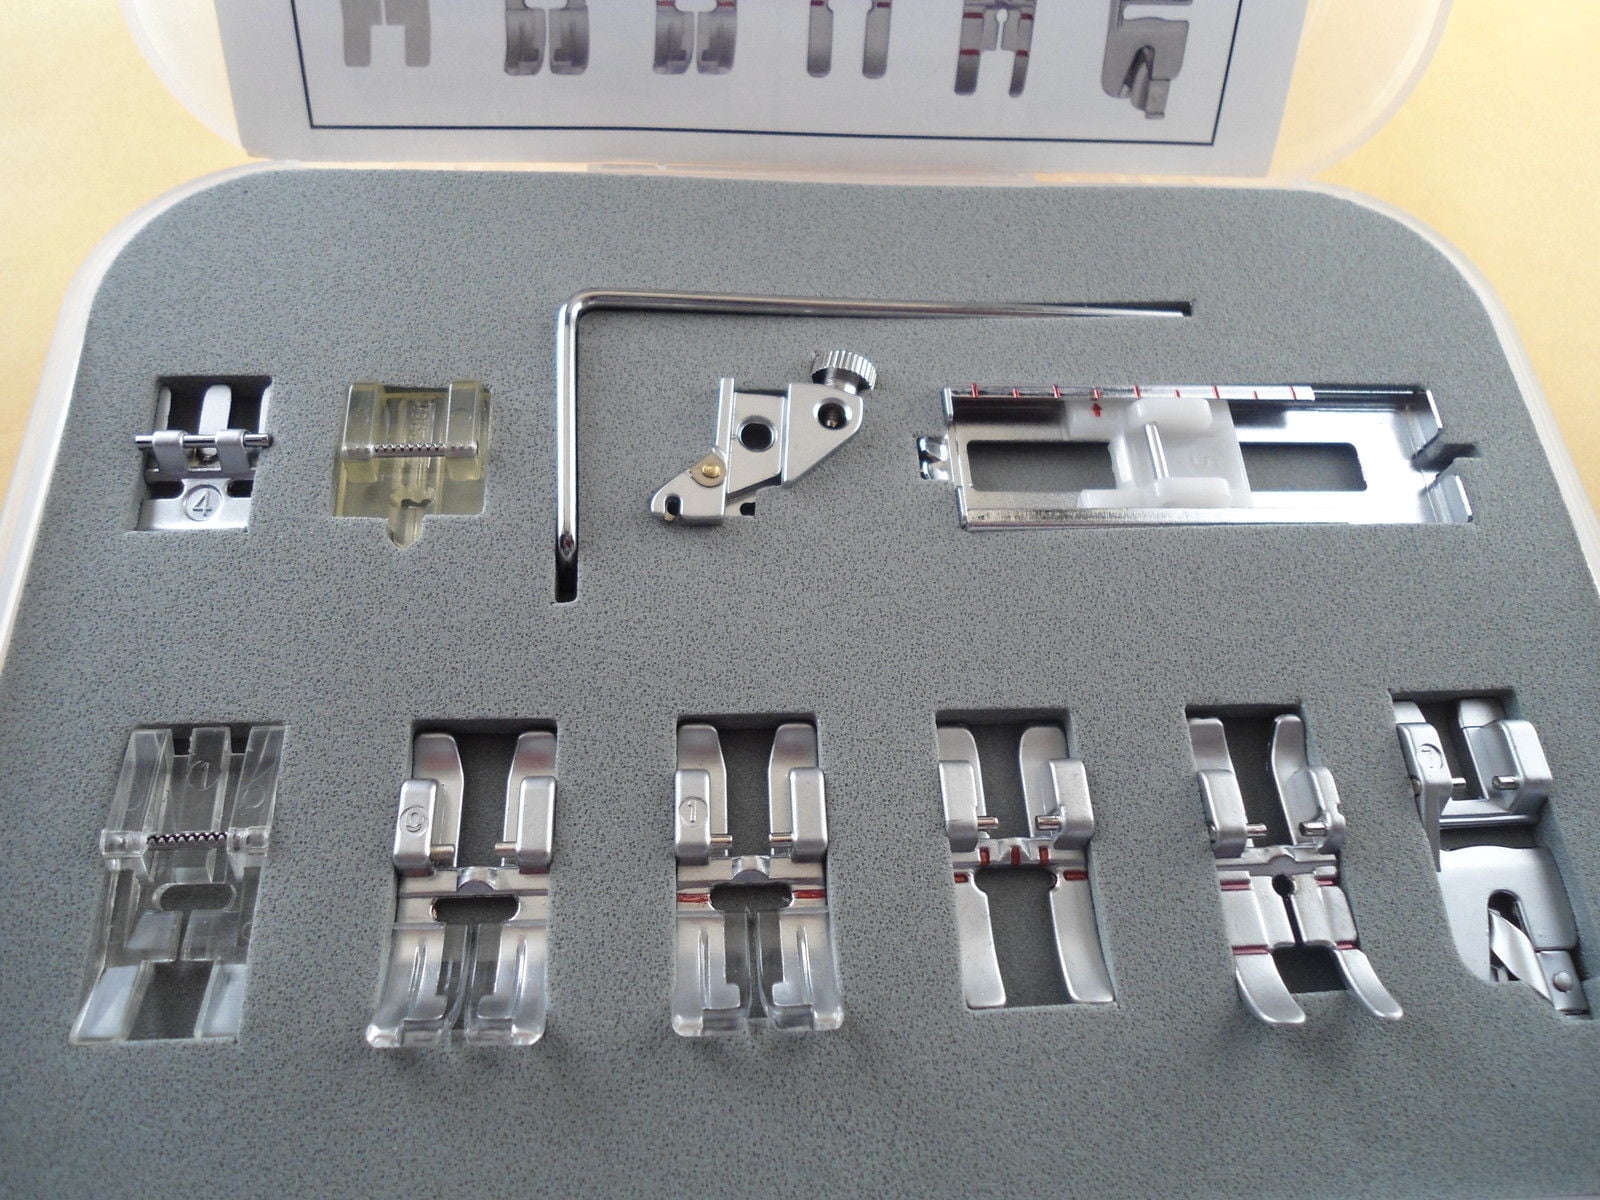 Silver Austin 11-Piece Pfaff Sewing Feet Kit Suitable for The IDT System 18.5 x 13.5 x 2.8 cm